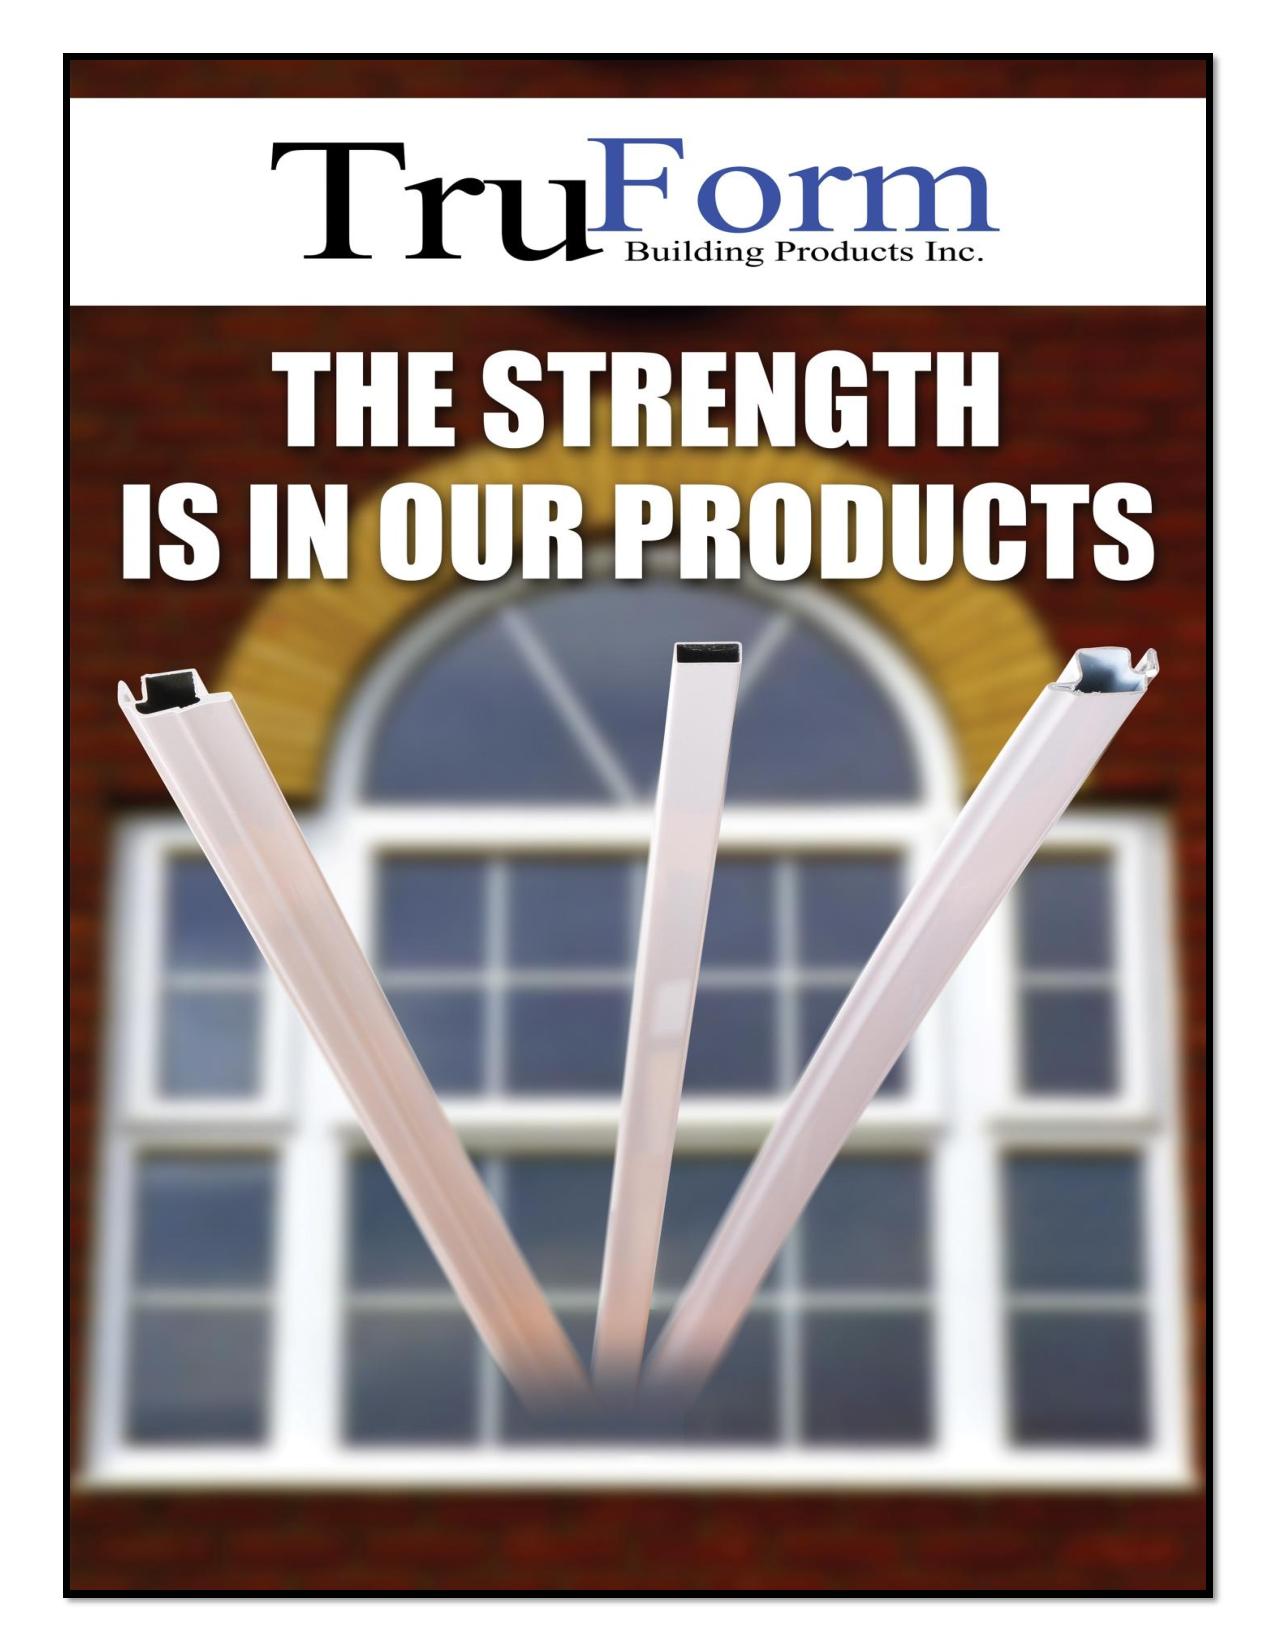 Truform products inc meeting all of your fenestration needs across Canada and the U.S.A.